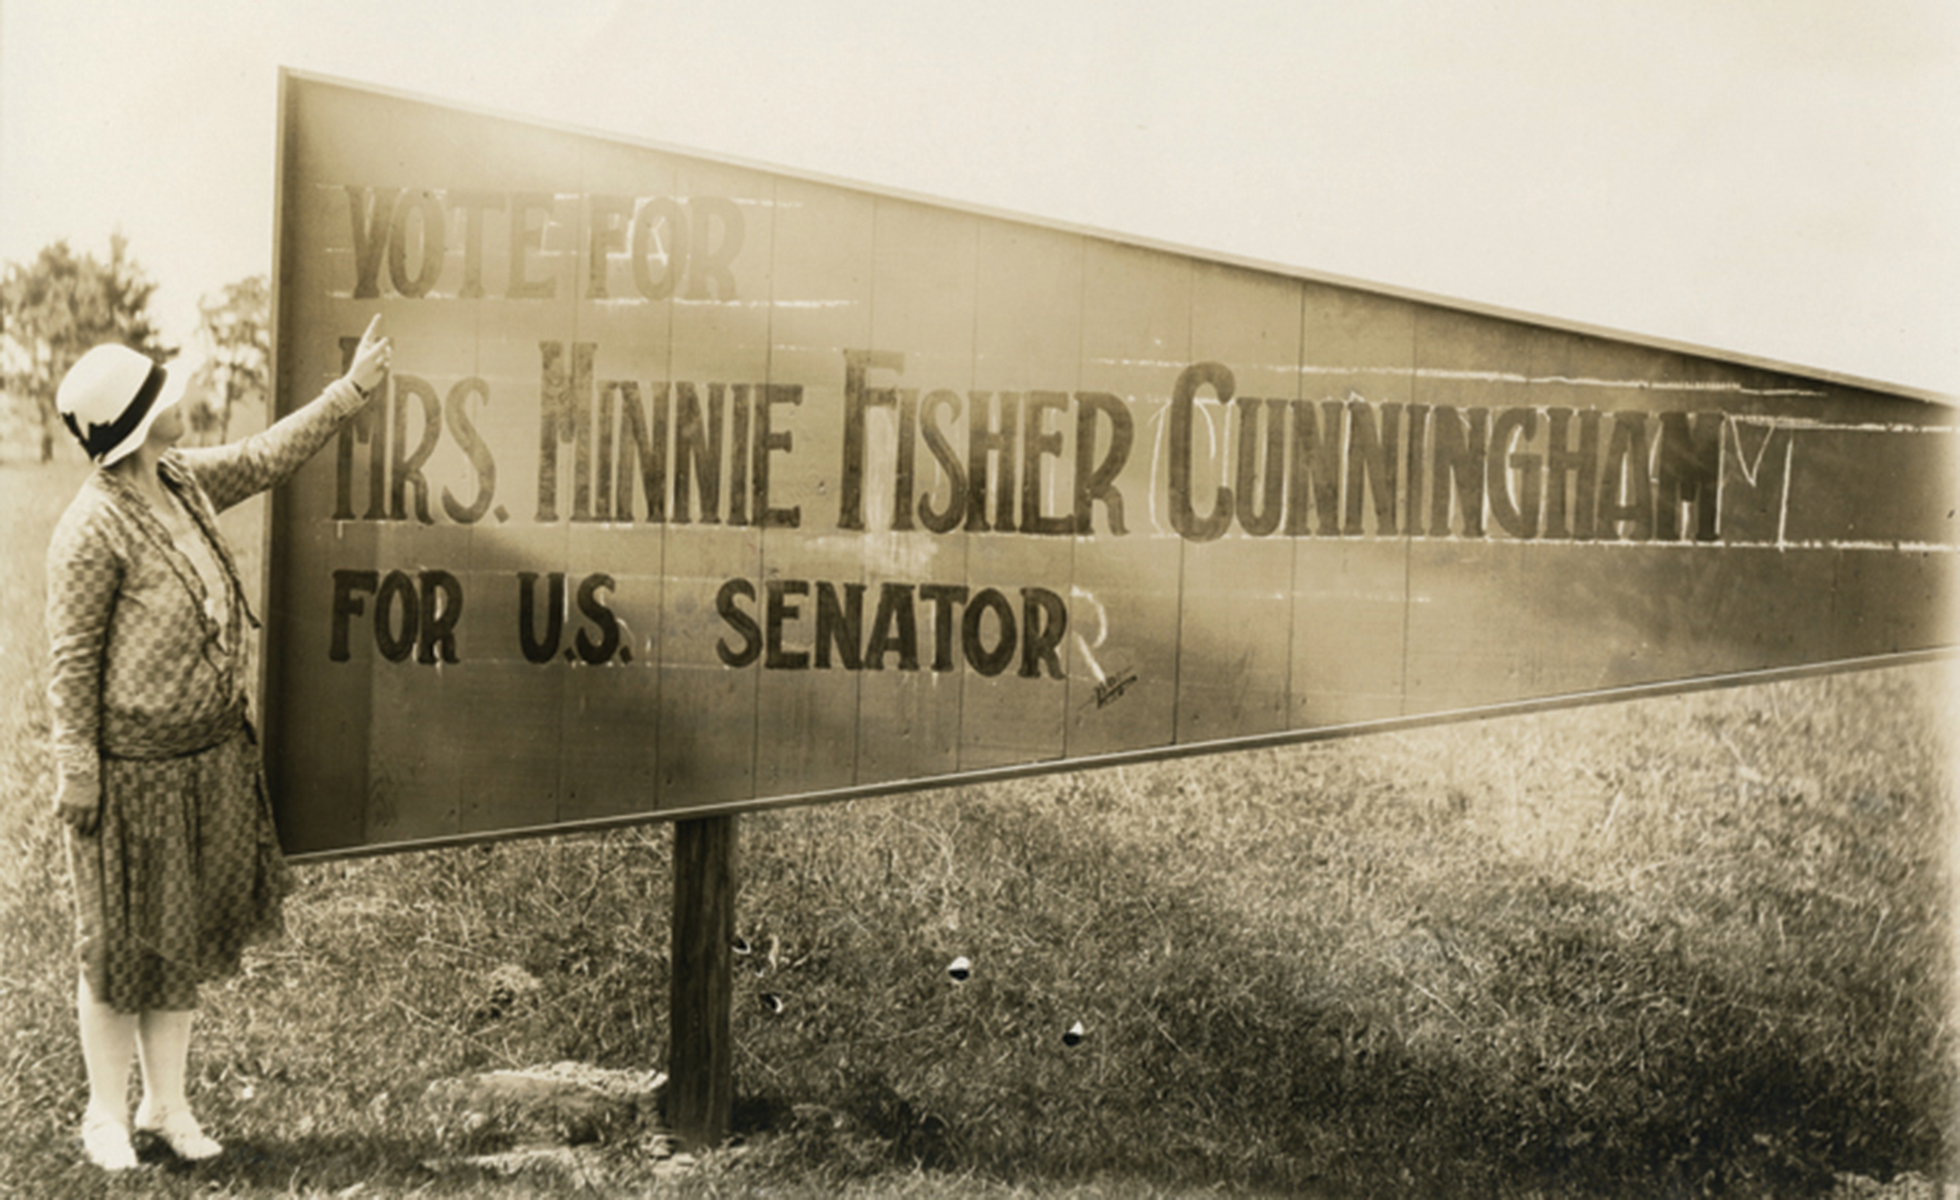 Cunningham campaigning for the U.S. Senate in 1927.